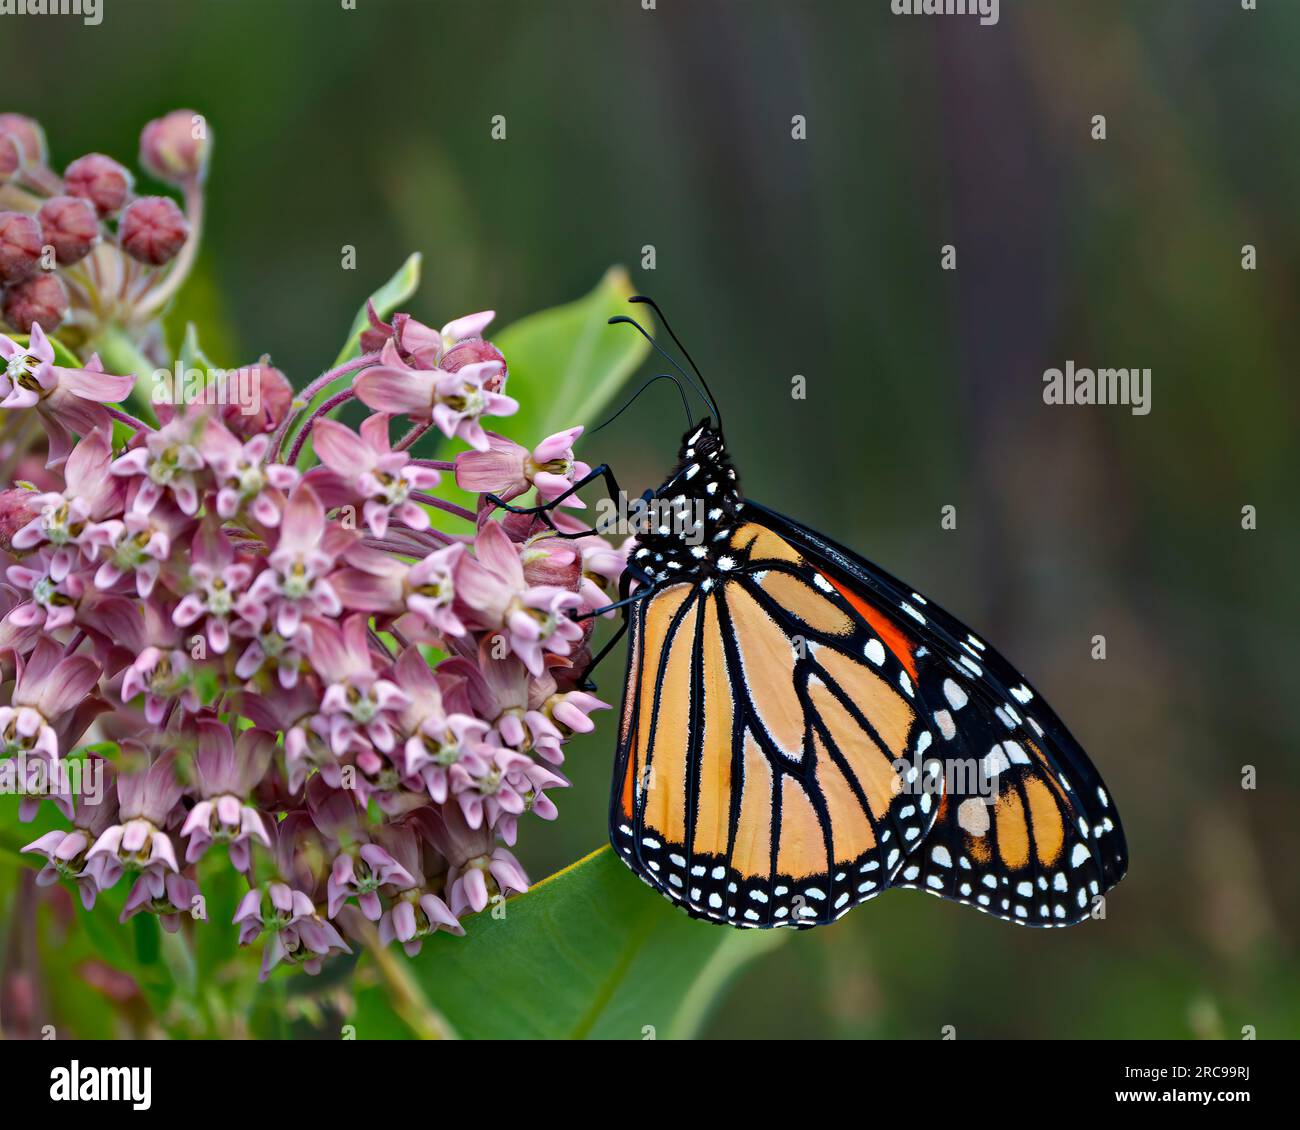 Monarch Butterfly close-up side view sipping or drinking nectar from a milkweed plant with a colourful background in its environment and habitat. Stock Photo